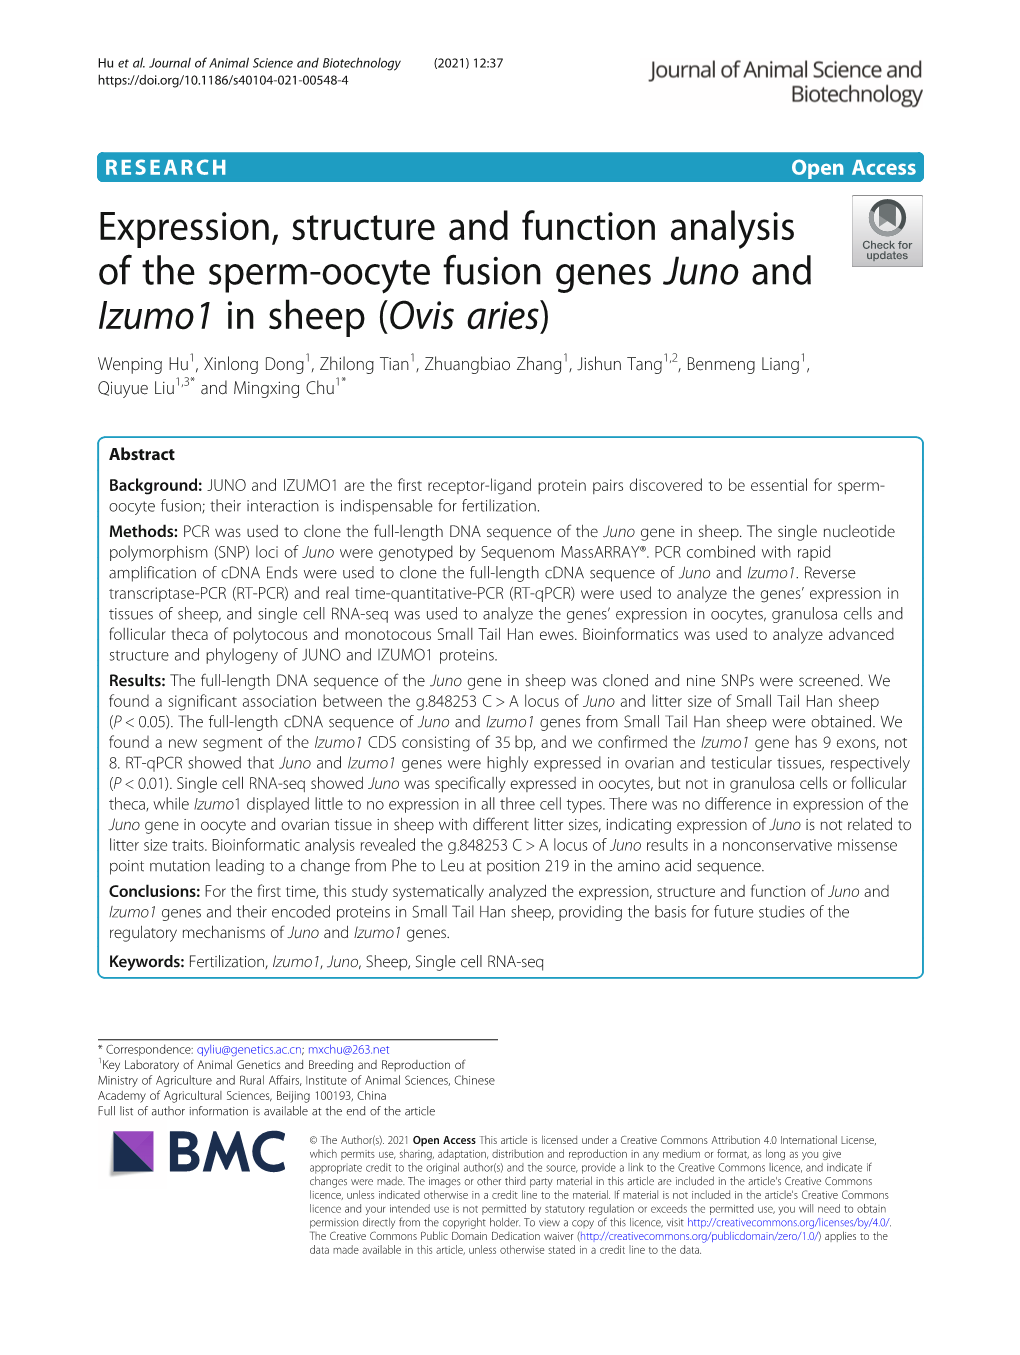 Expression, Structure and Function Analysis of the Sperm-Oocyte Fusion